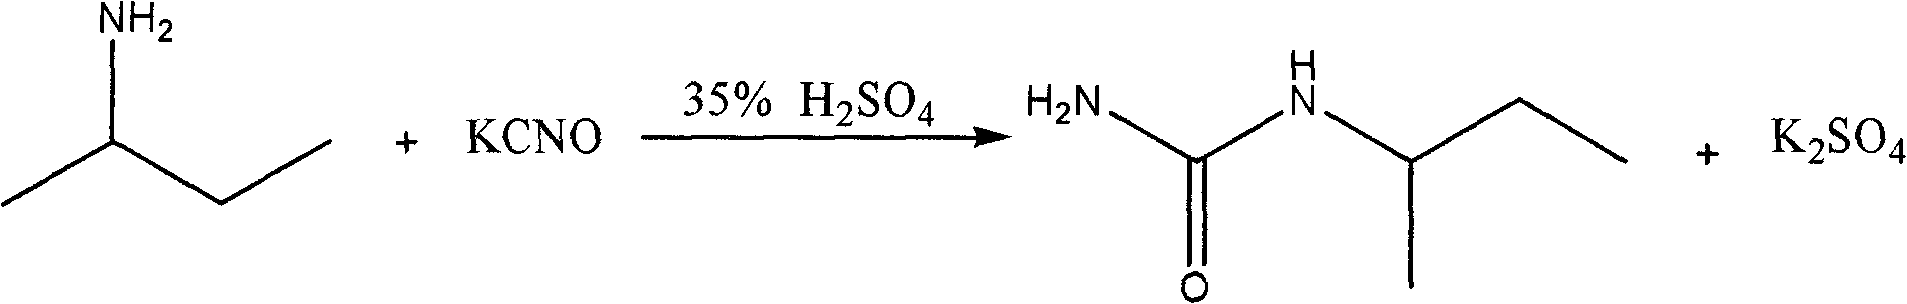 Synthetic process of herbicide